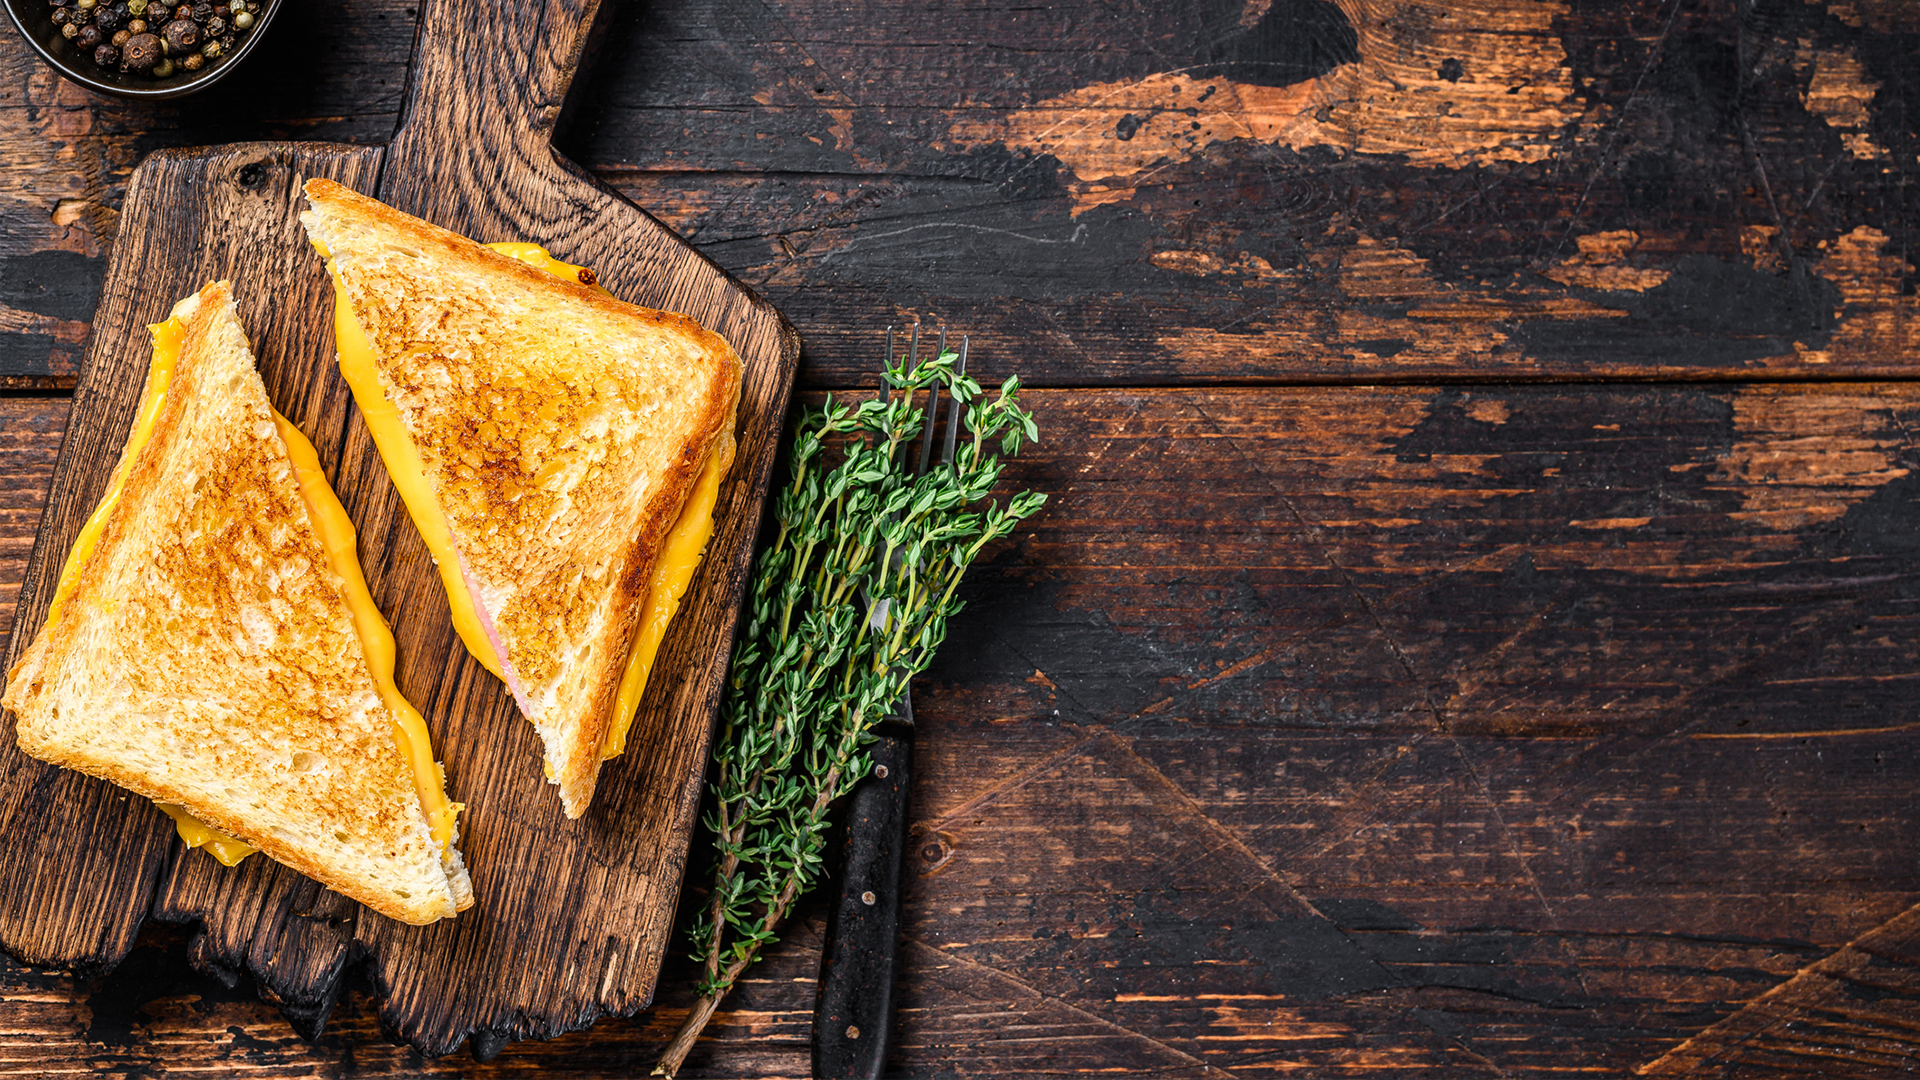 12 Grilled Cheese Recipes to Master